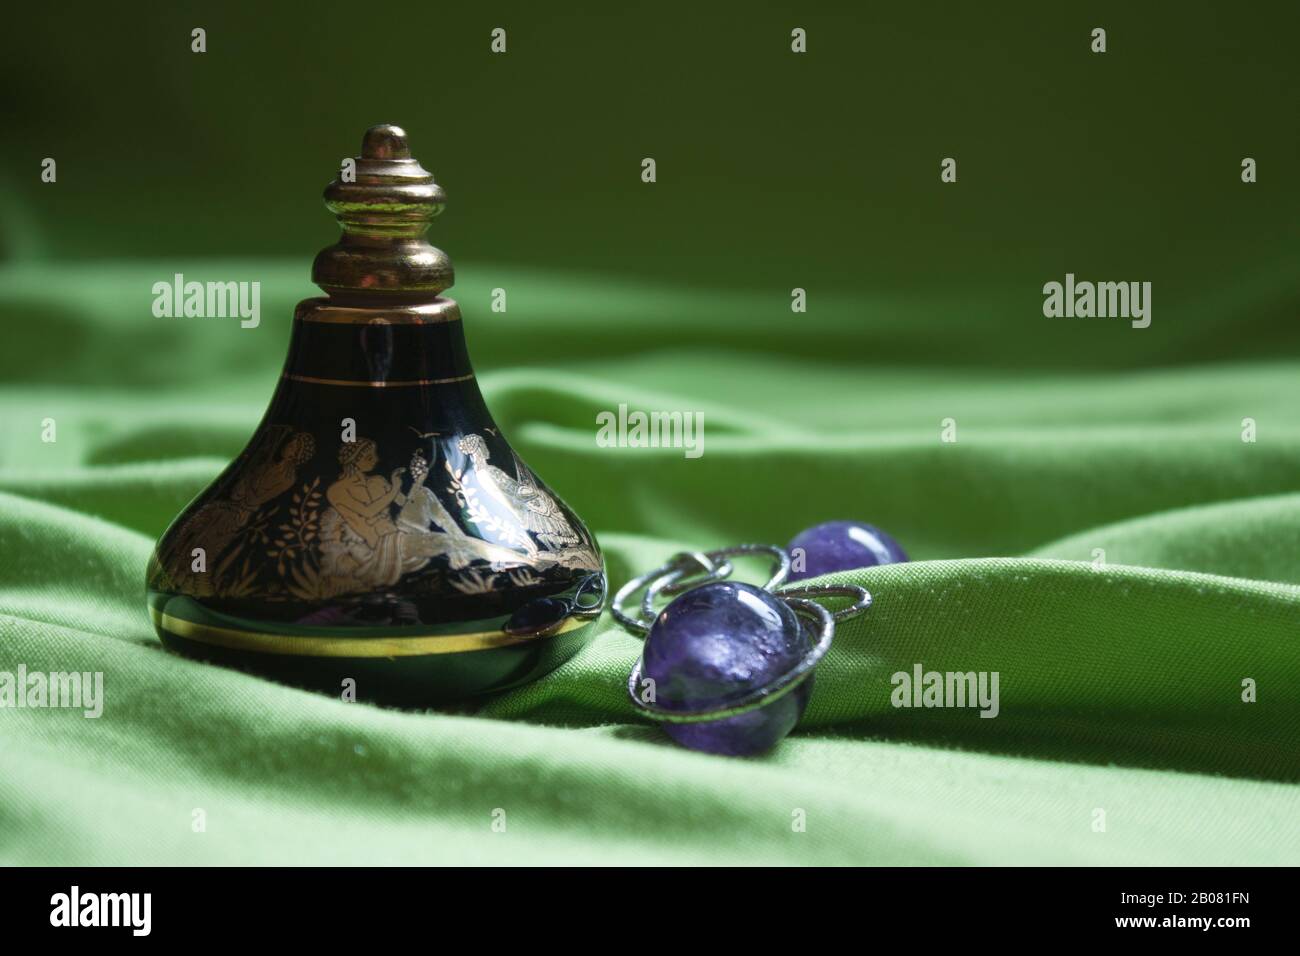 The antique perfume bottle and amethyst on green drapery. Stock Photo